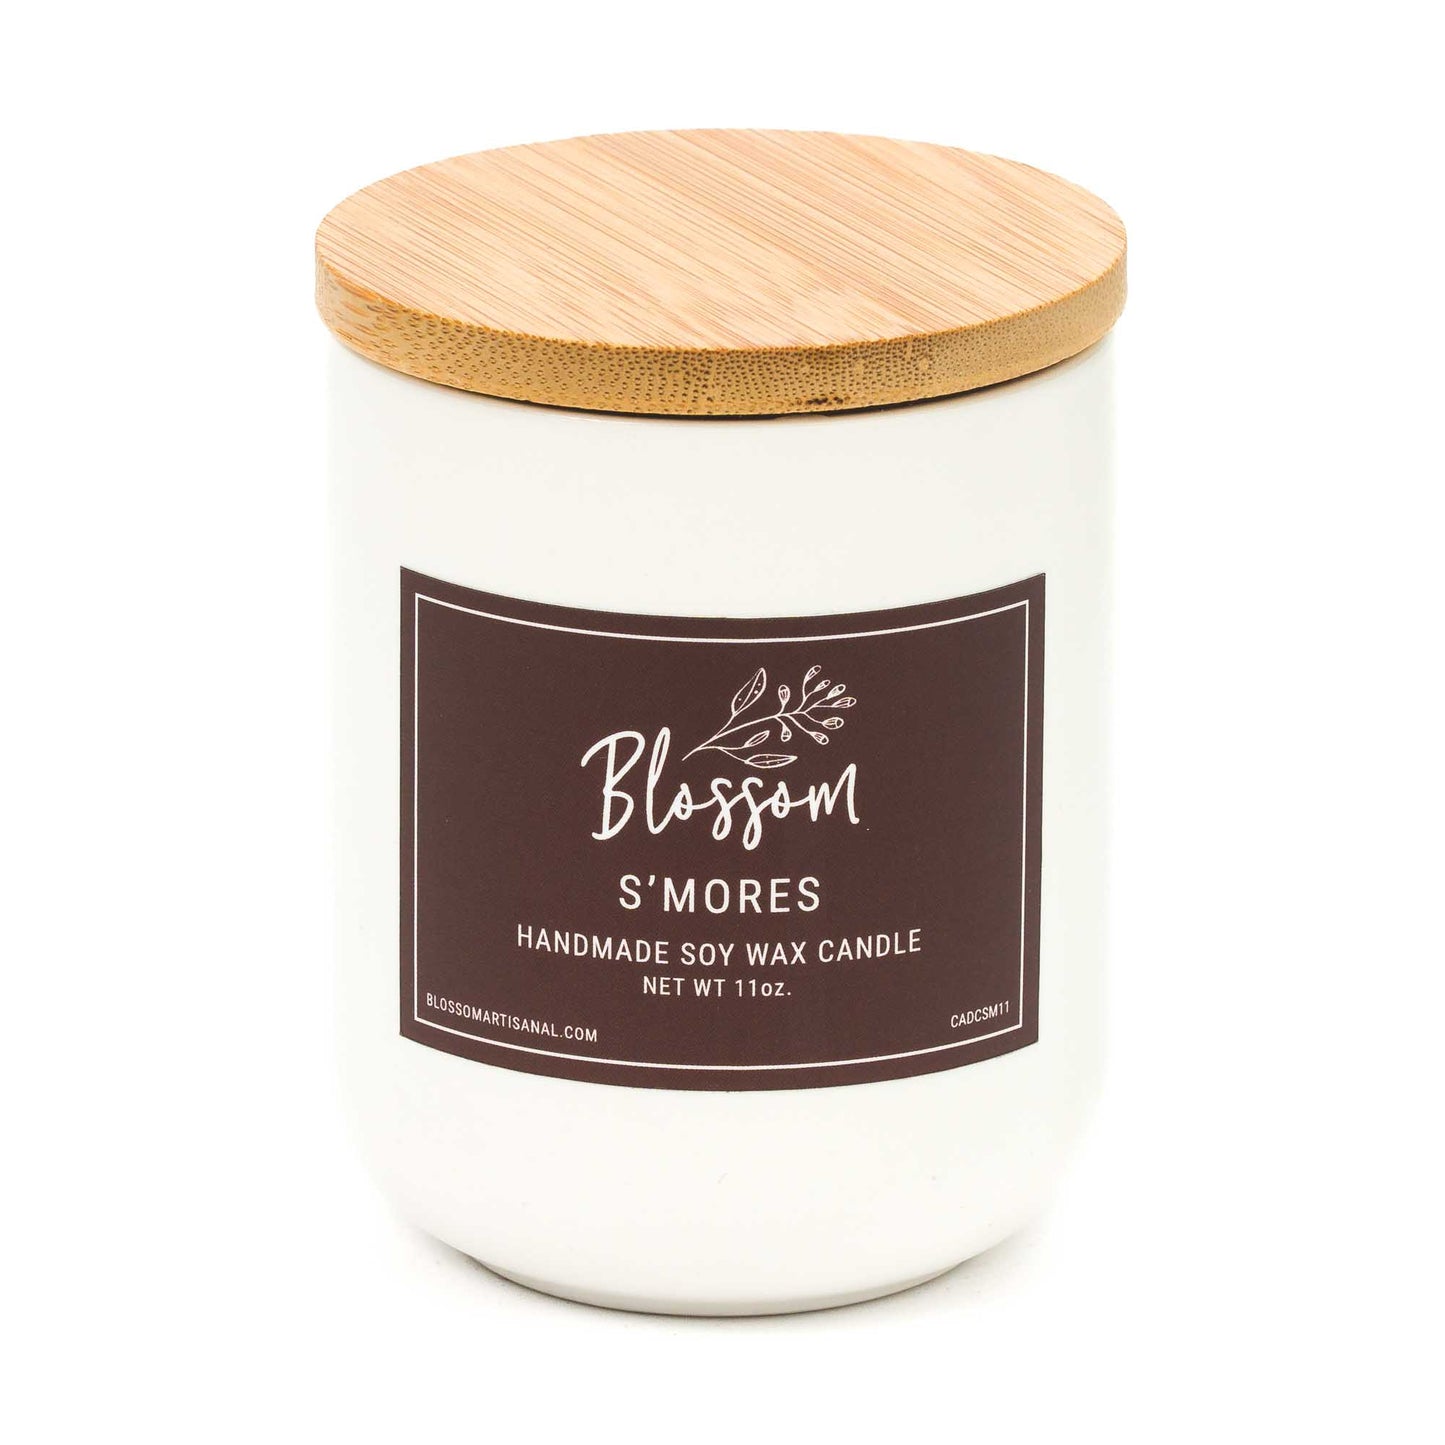 S'mores 11 oz. Deco Soy Wax Candle